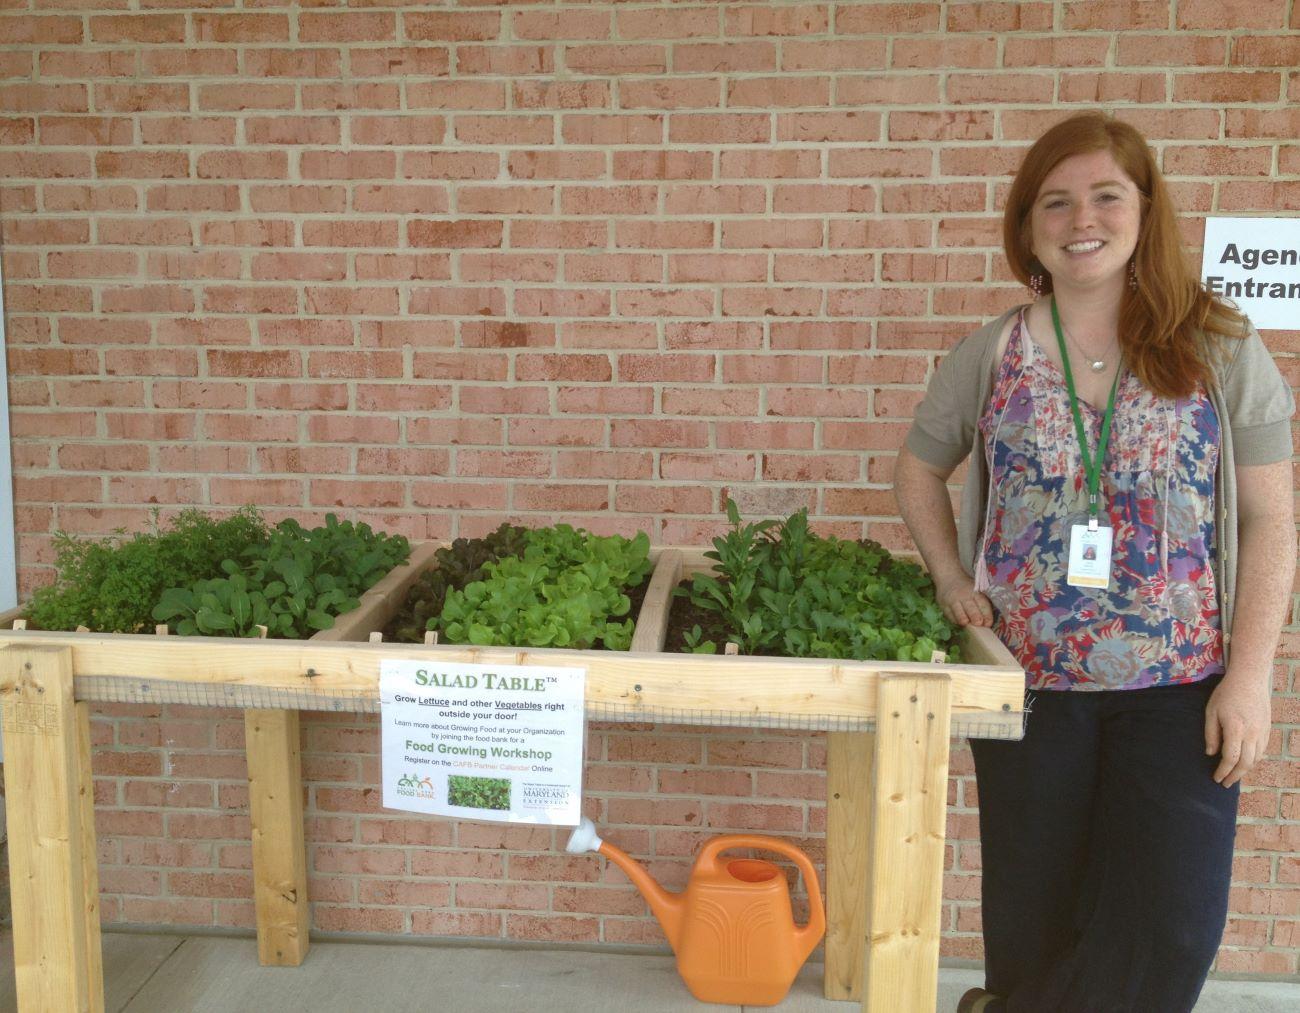 a woman standing next to a salad table planted with lettuces